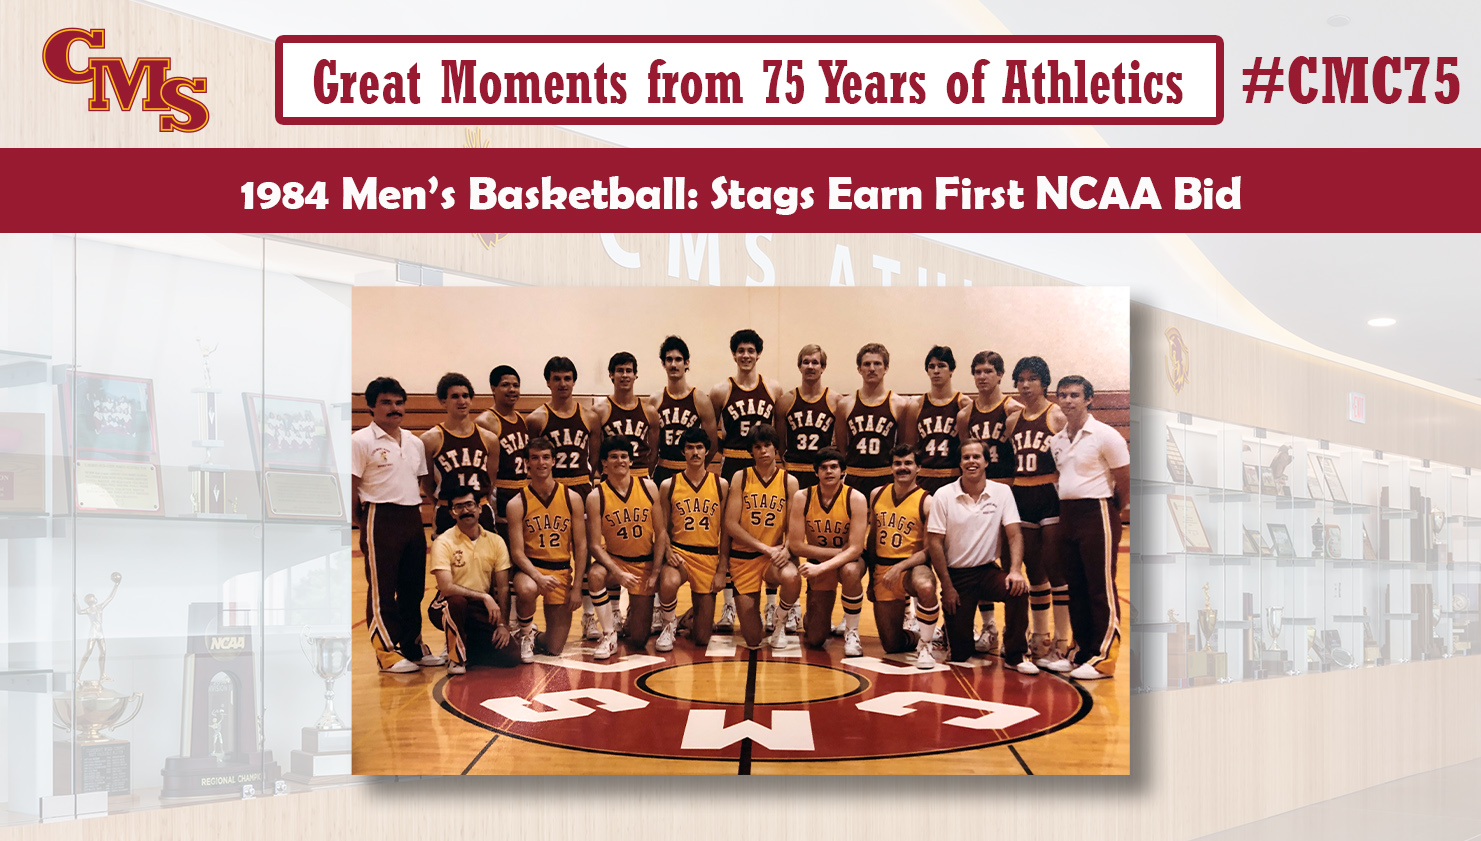 The 1984 MBB team shot. Words over the photo read: Great Moments from 75 Years of Athletics. 1984 Men's Basketball: Stags Earn First NCAA Bid